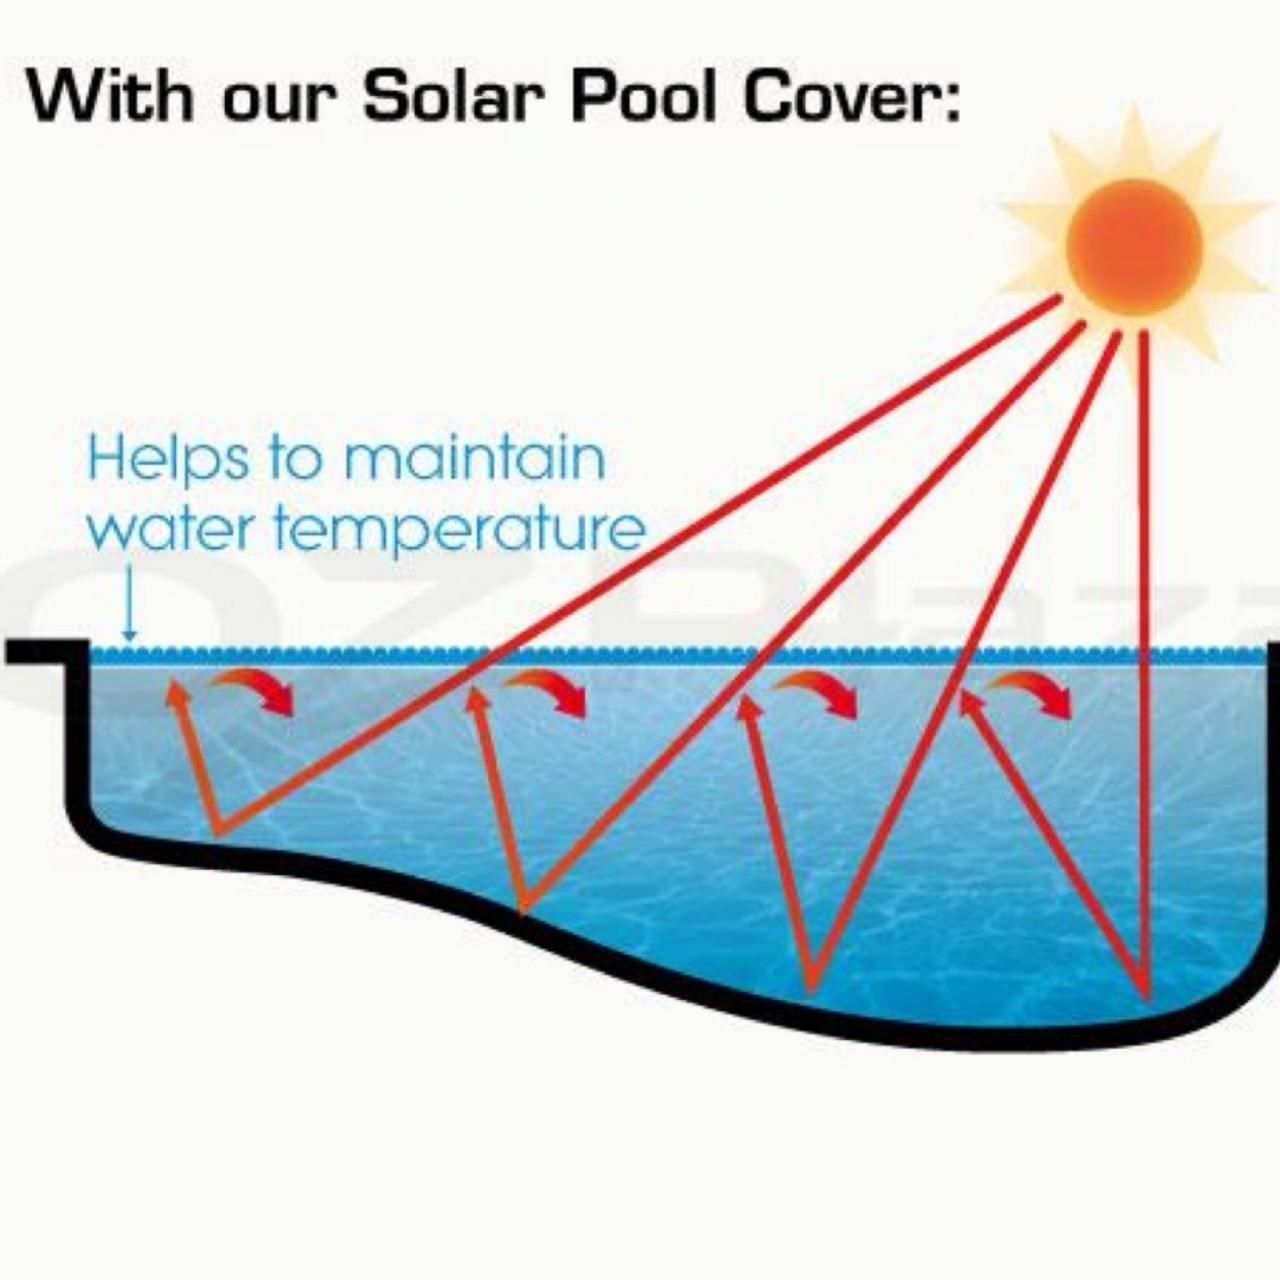 SILVER SOLAR SWIMMING POOL COVER 500 MICRON OUTDOOR BUBBLE BLANKET 10.0 X 5.0M